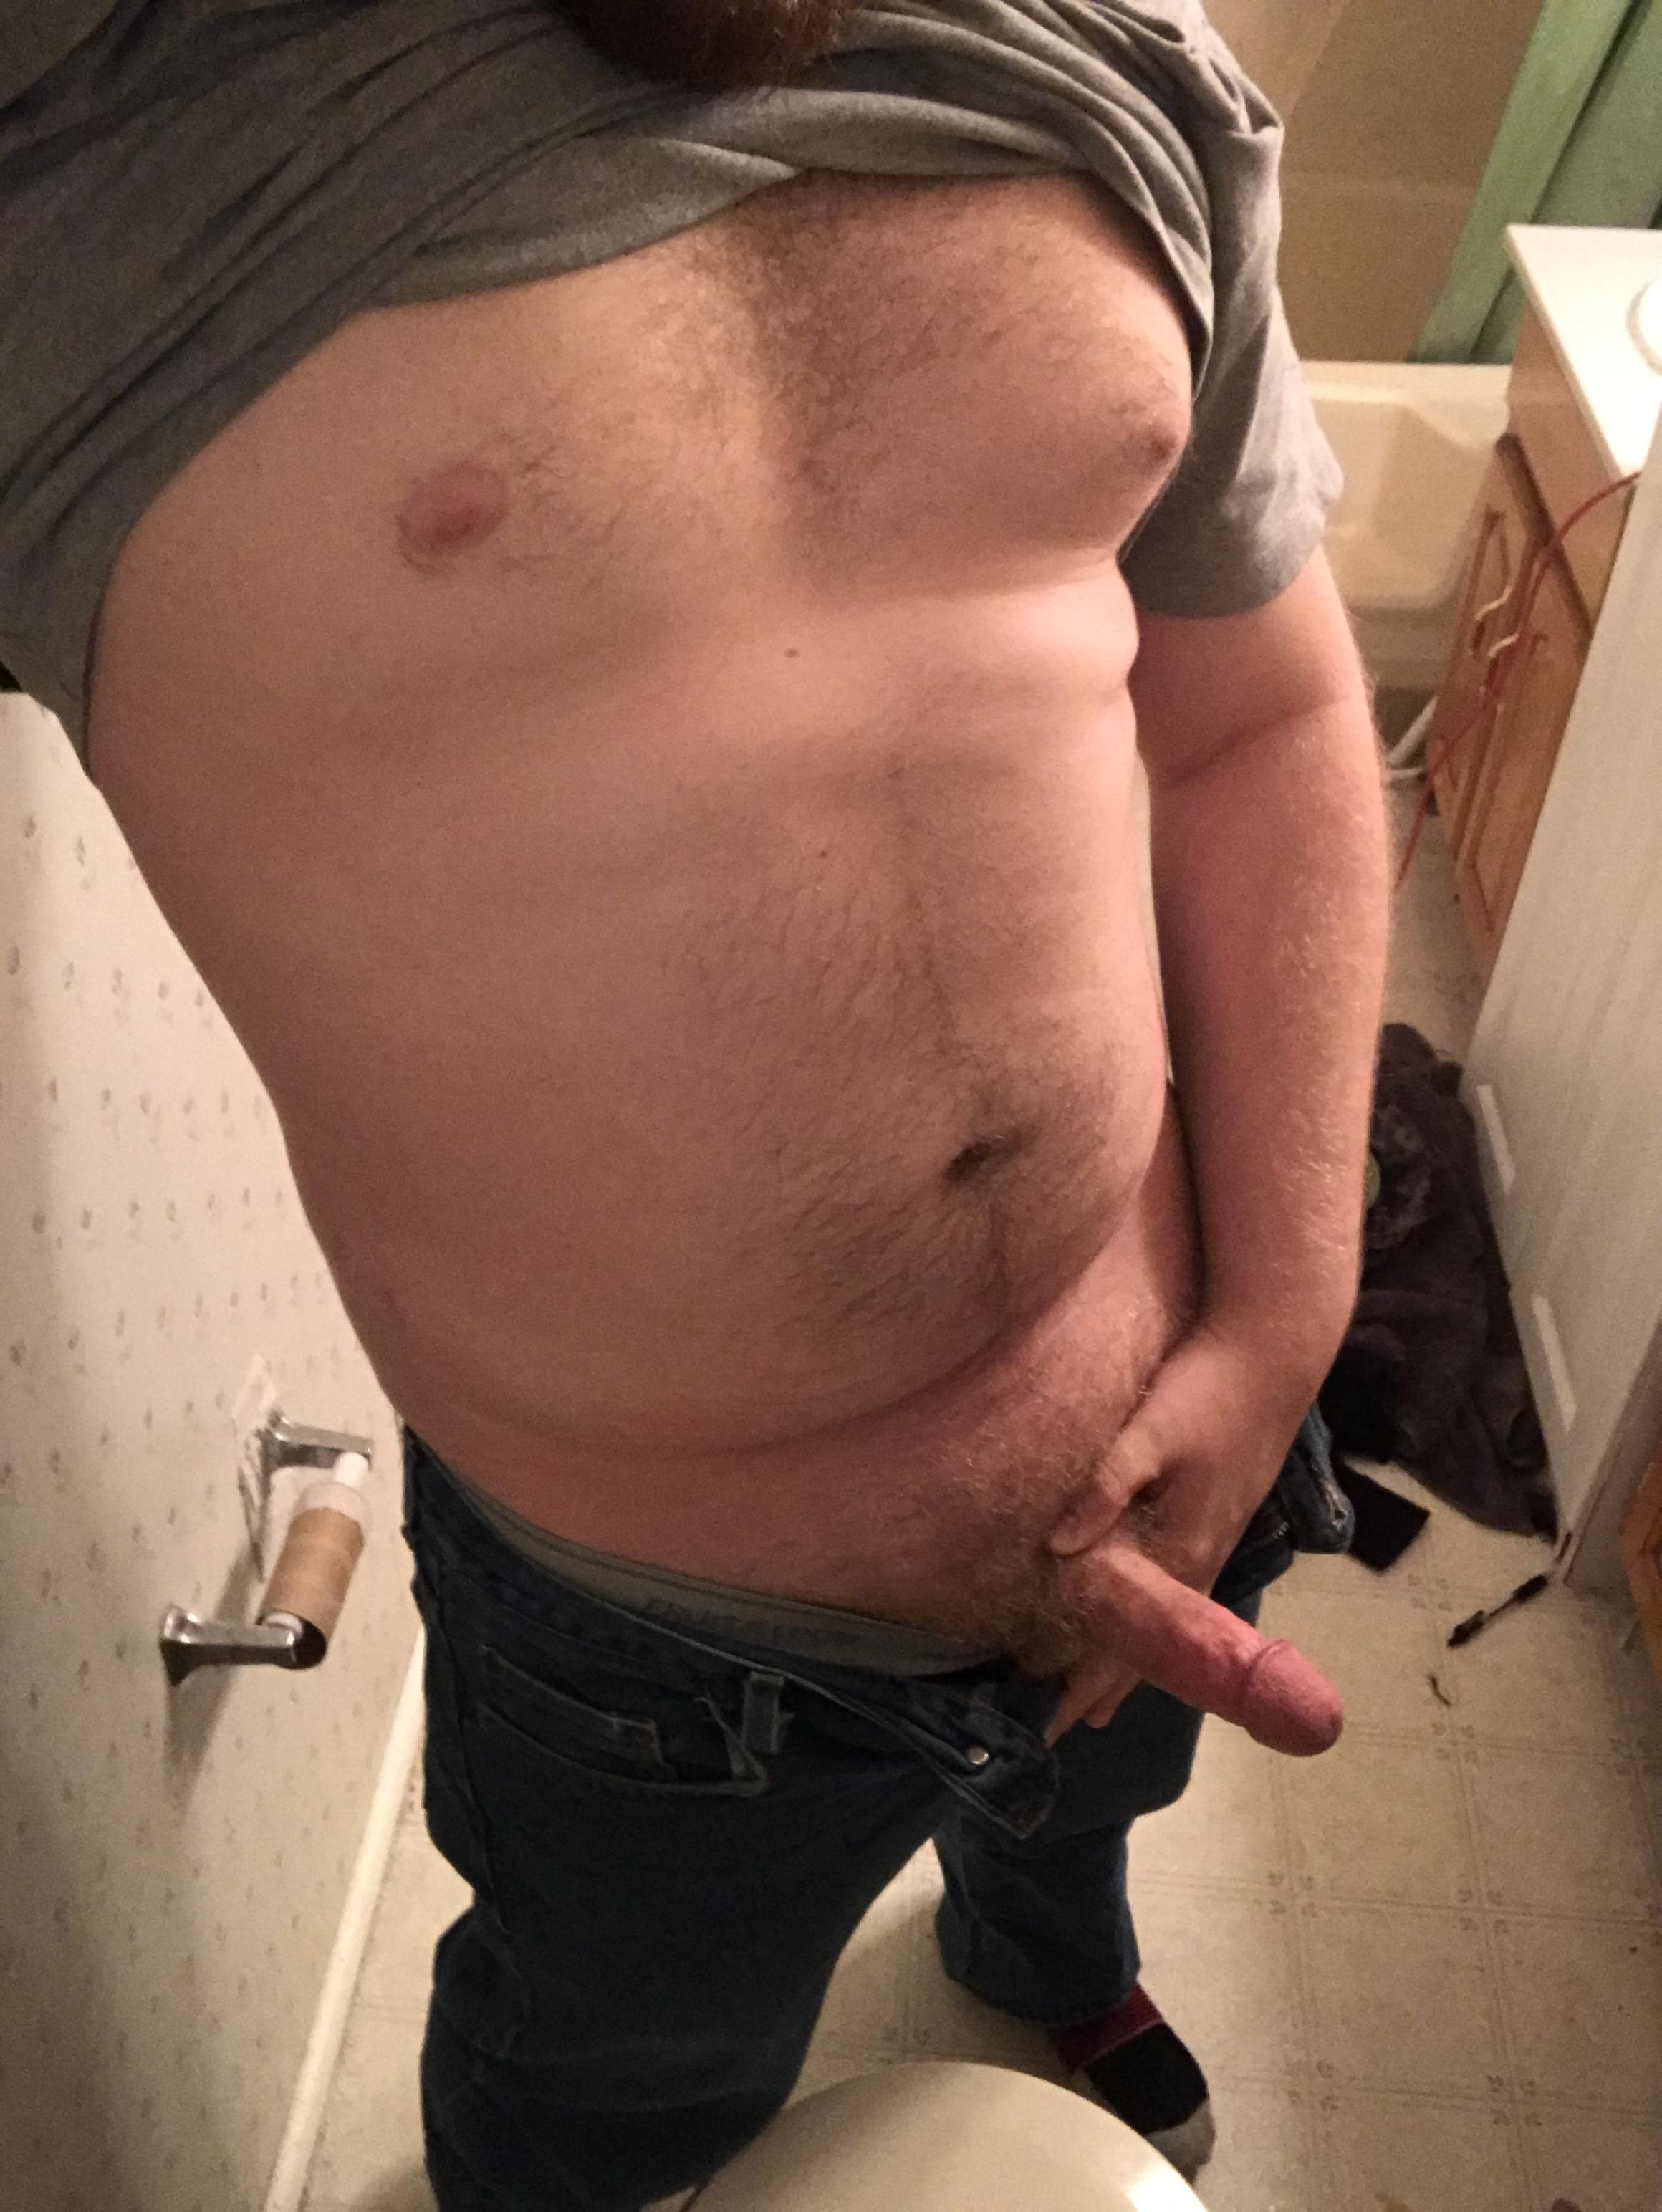 I’m so fucking horny. Had to sneak a pic while hanging with some friends.